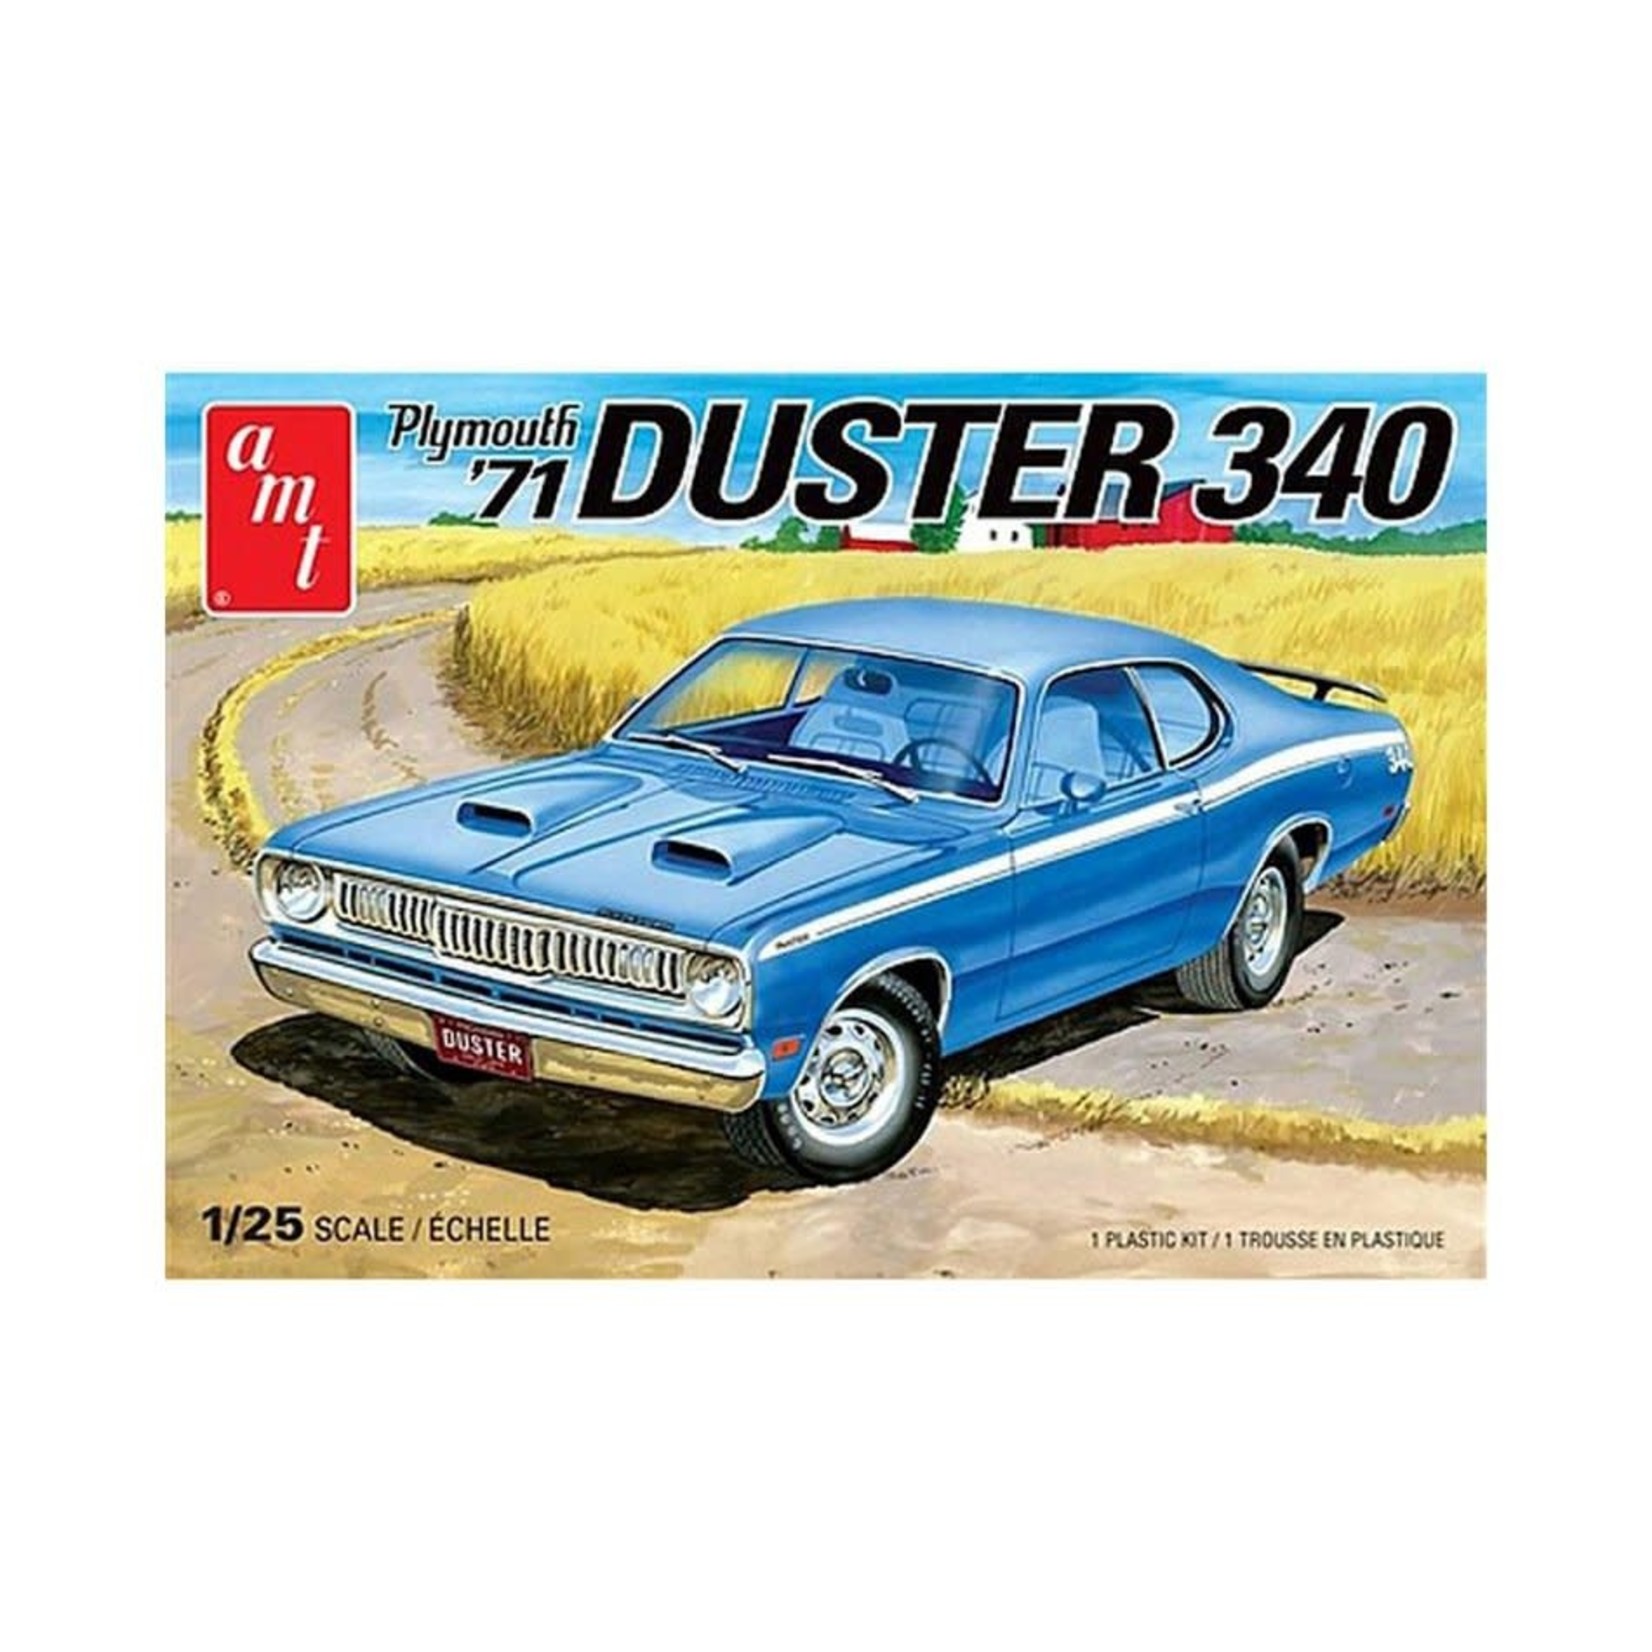 AMT 1/25 '71 Plymouth Duster 340 Kit